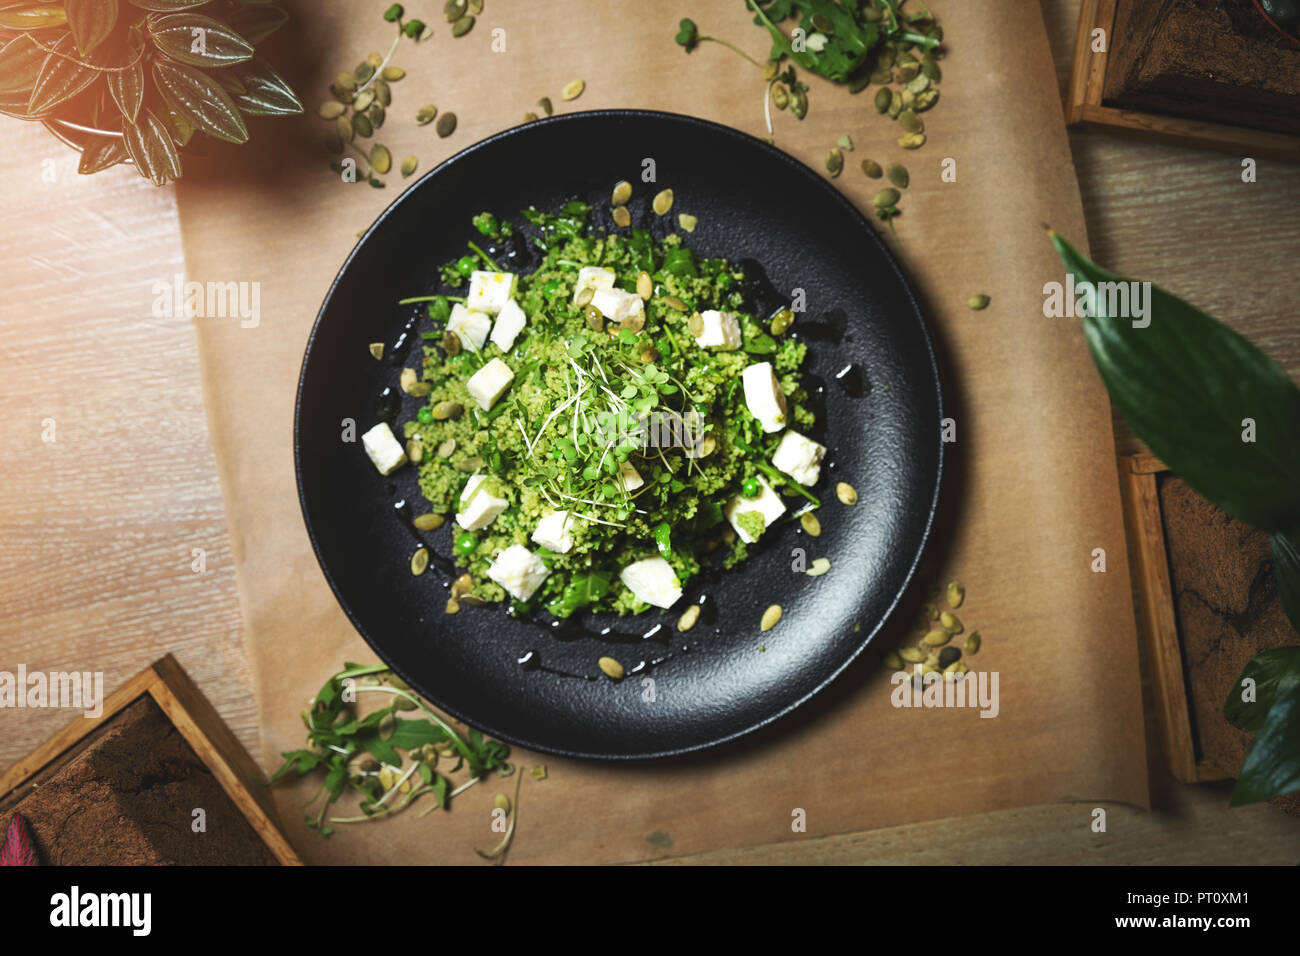 green couscous and goat cheese salad Stock Photo